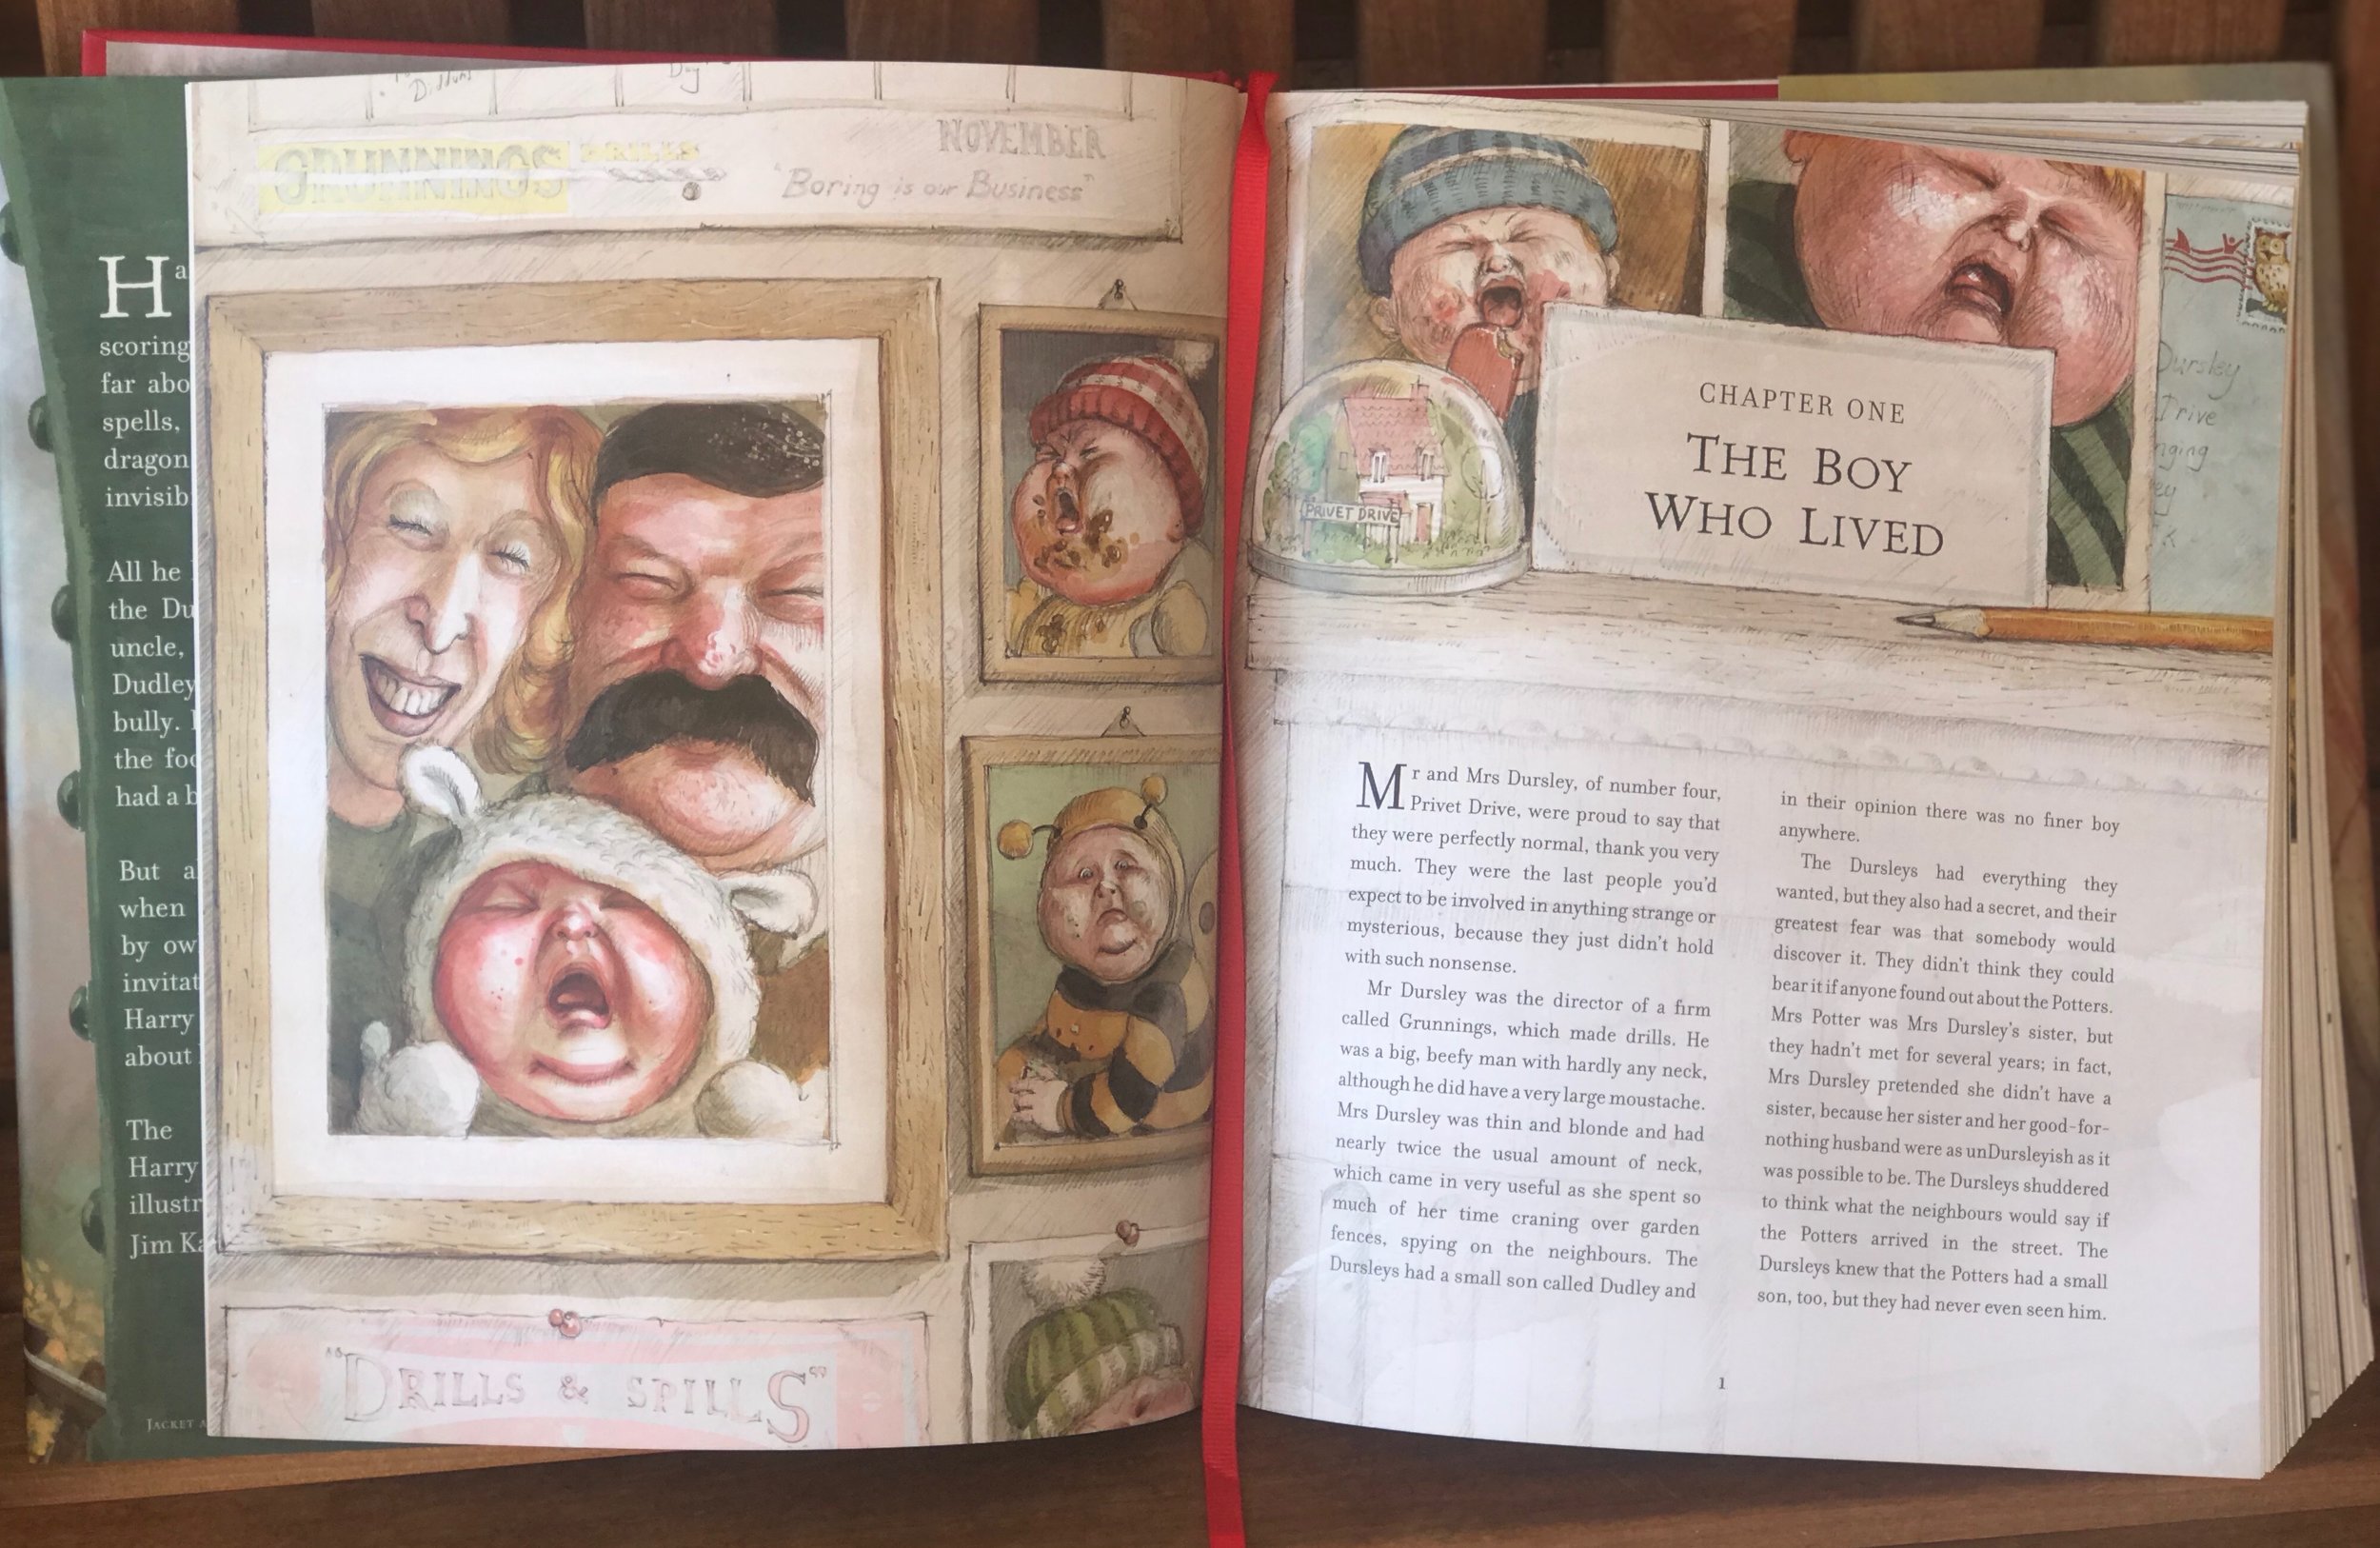 Harry Potter's Illustrated Editions are Remarkable | Dad Suggests